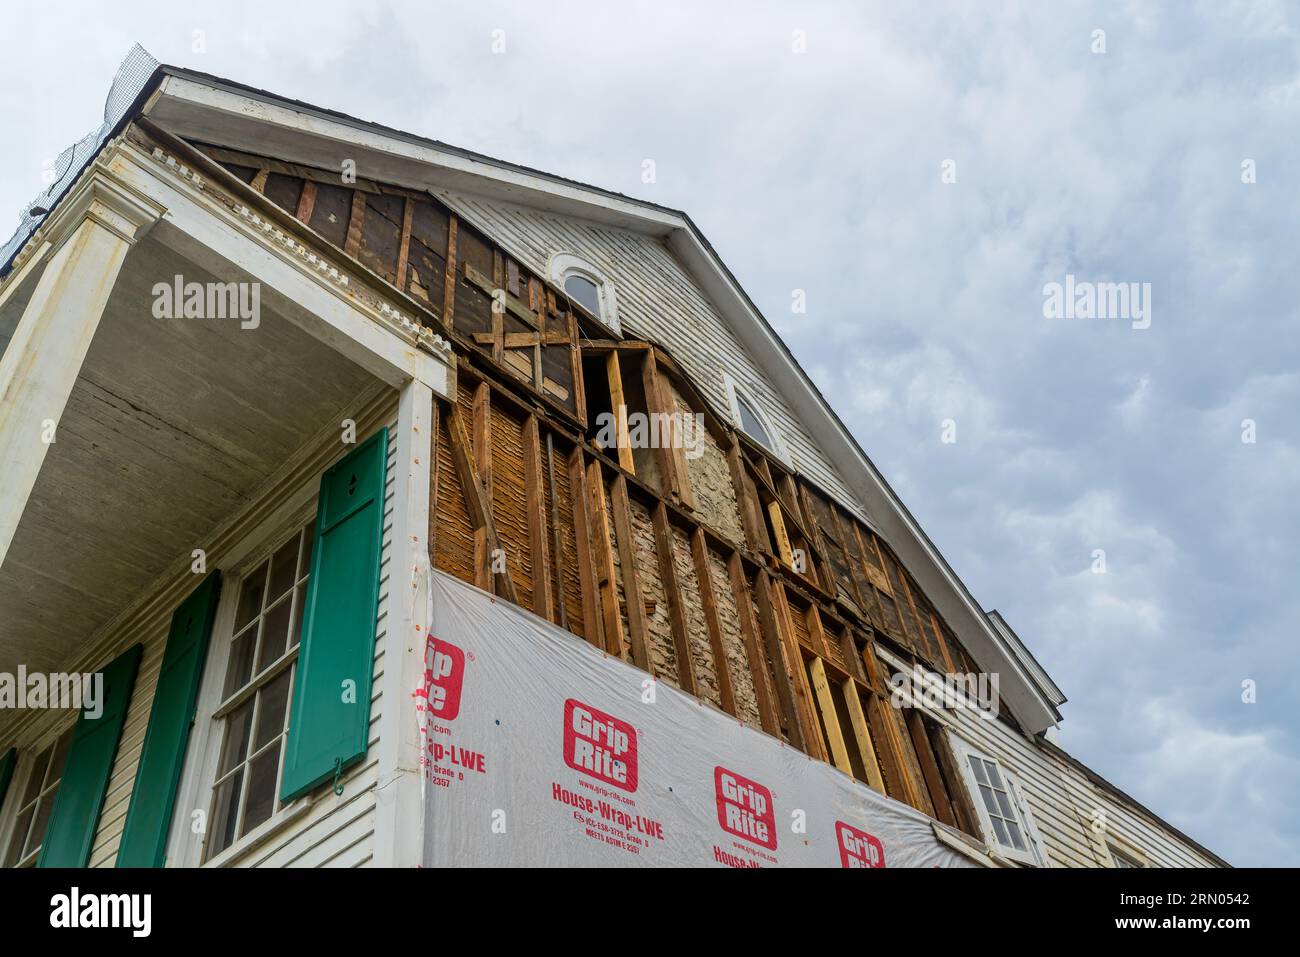 NEW ORLEANS, LA, USA - JUNE 6, 2021: Side of historic, partially demolished side wall of mansion with exposed studs and new Grip Rite House Wrap LWE Stock Photo